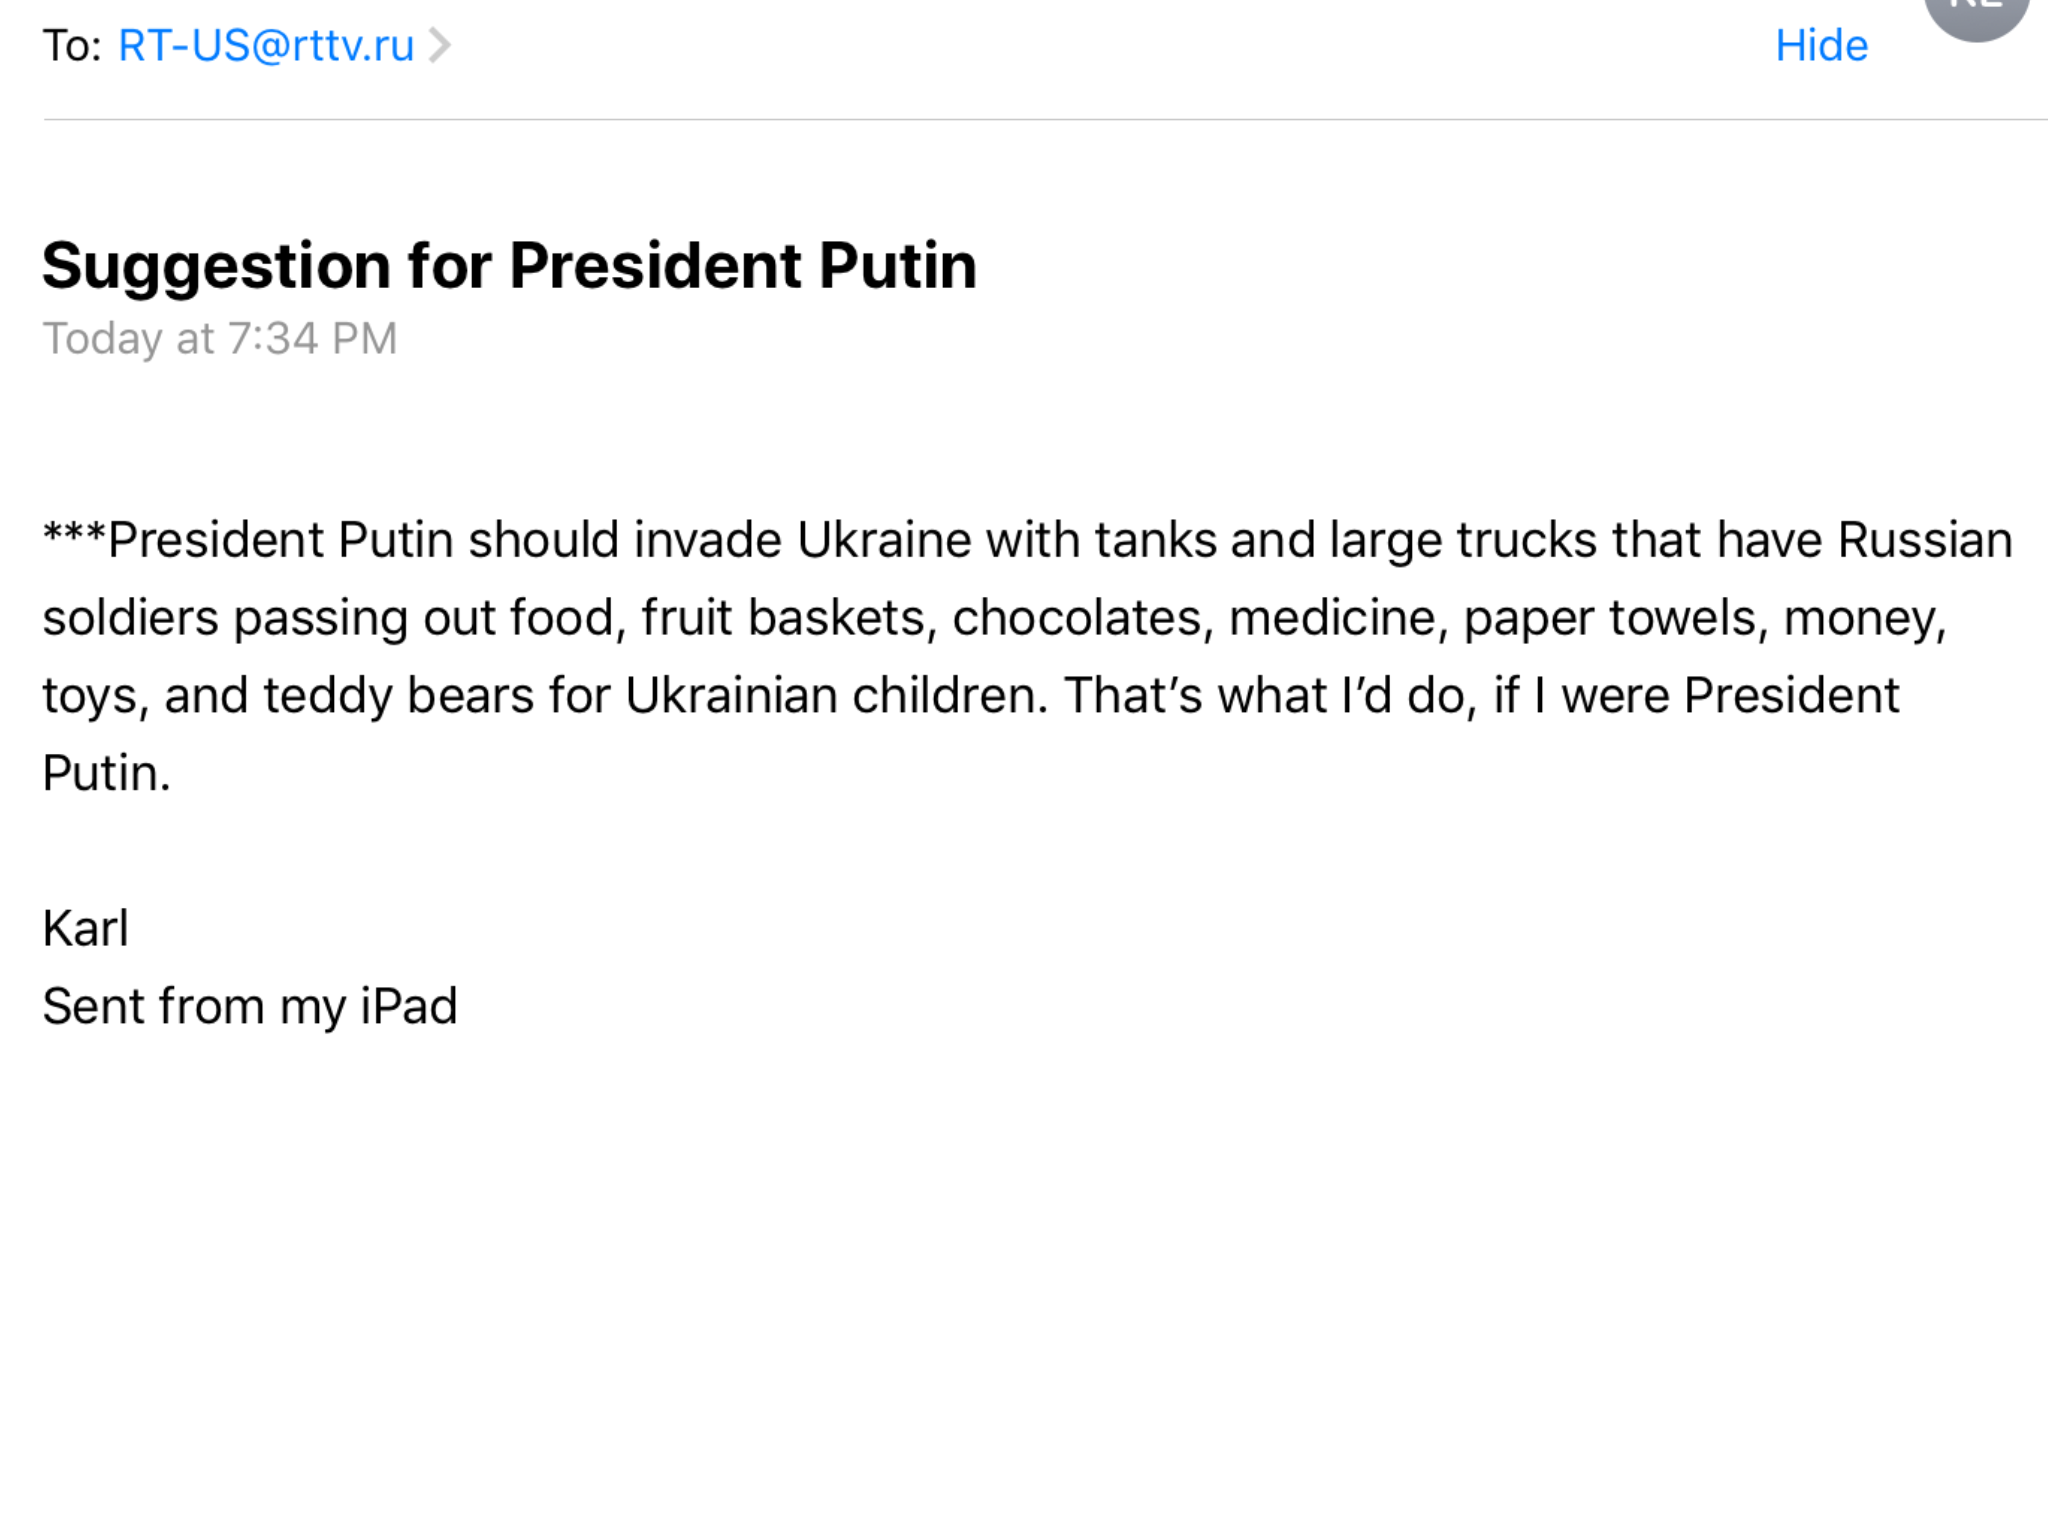 SCREENSHOT OF EMAIL SENT TO RT ON 1-24-2022